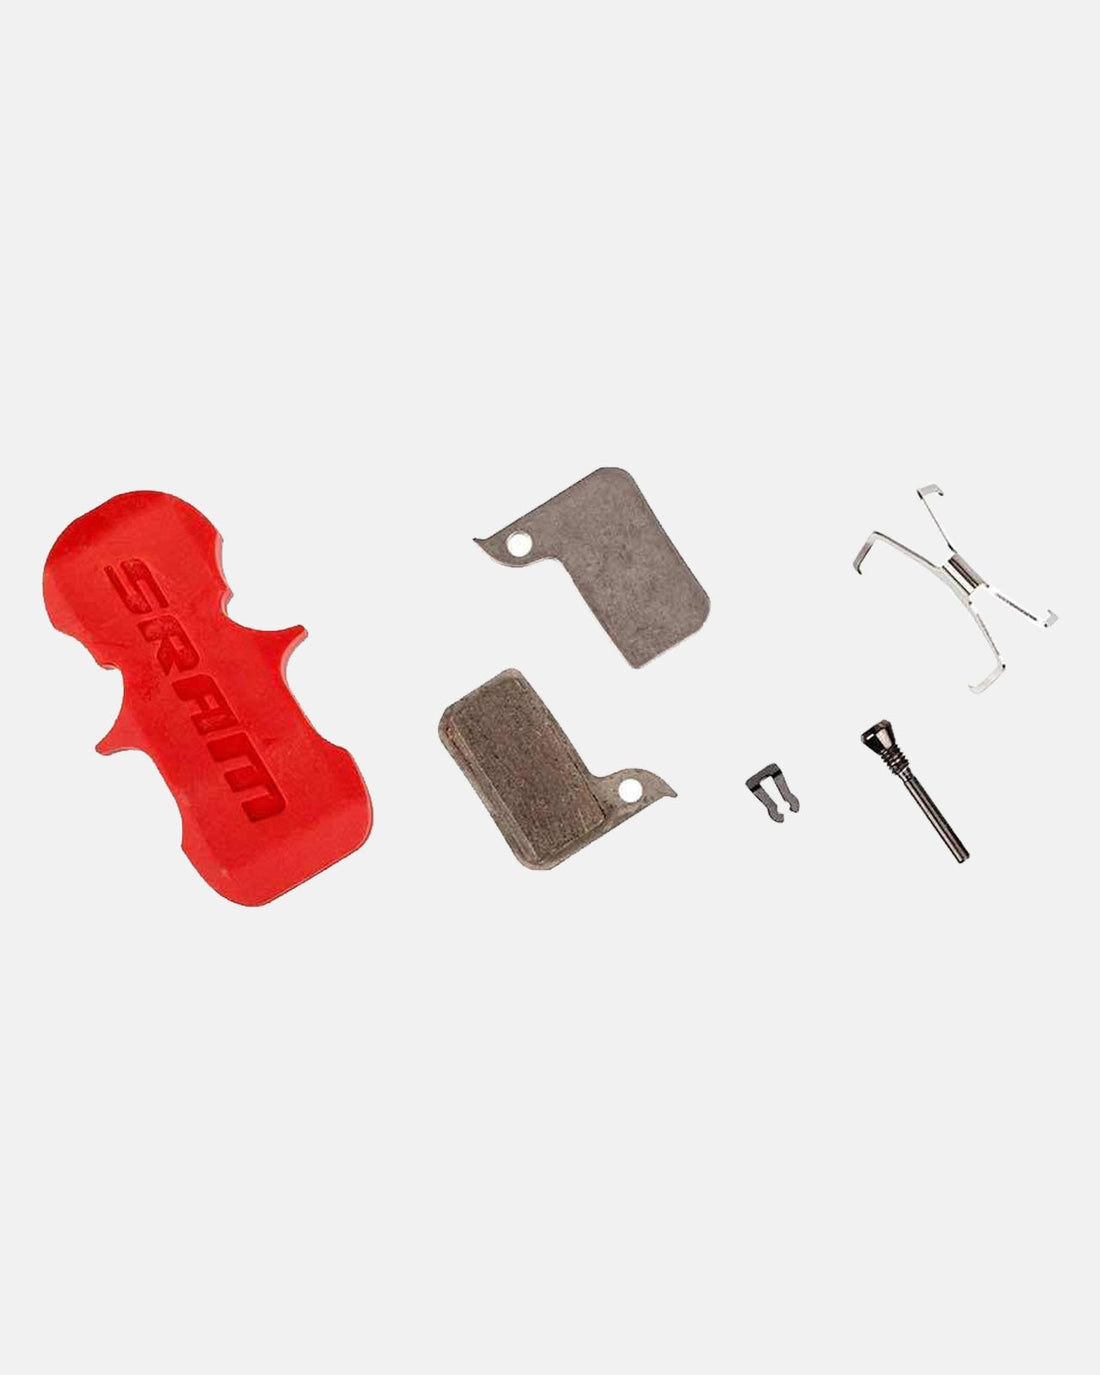 SRAM Ultimate Disc Brake Pads Organic with Aluminum Backing Plate